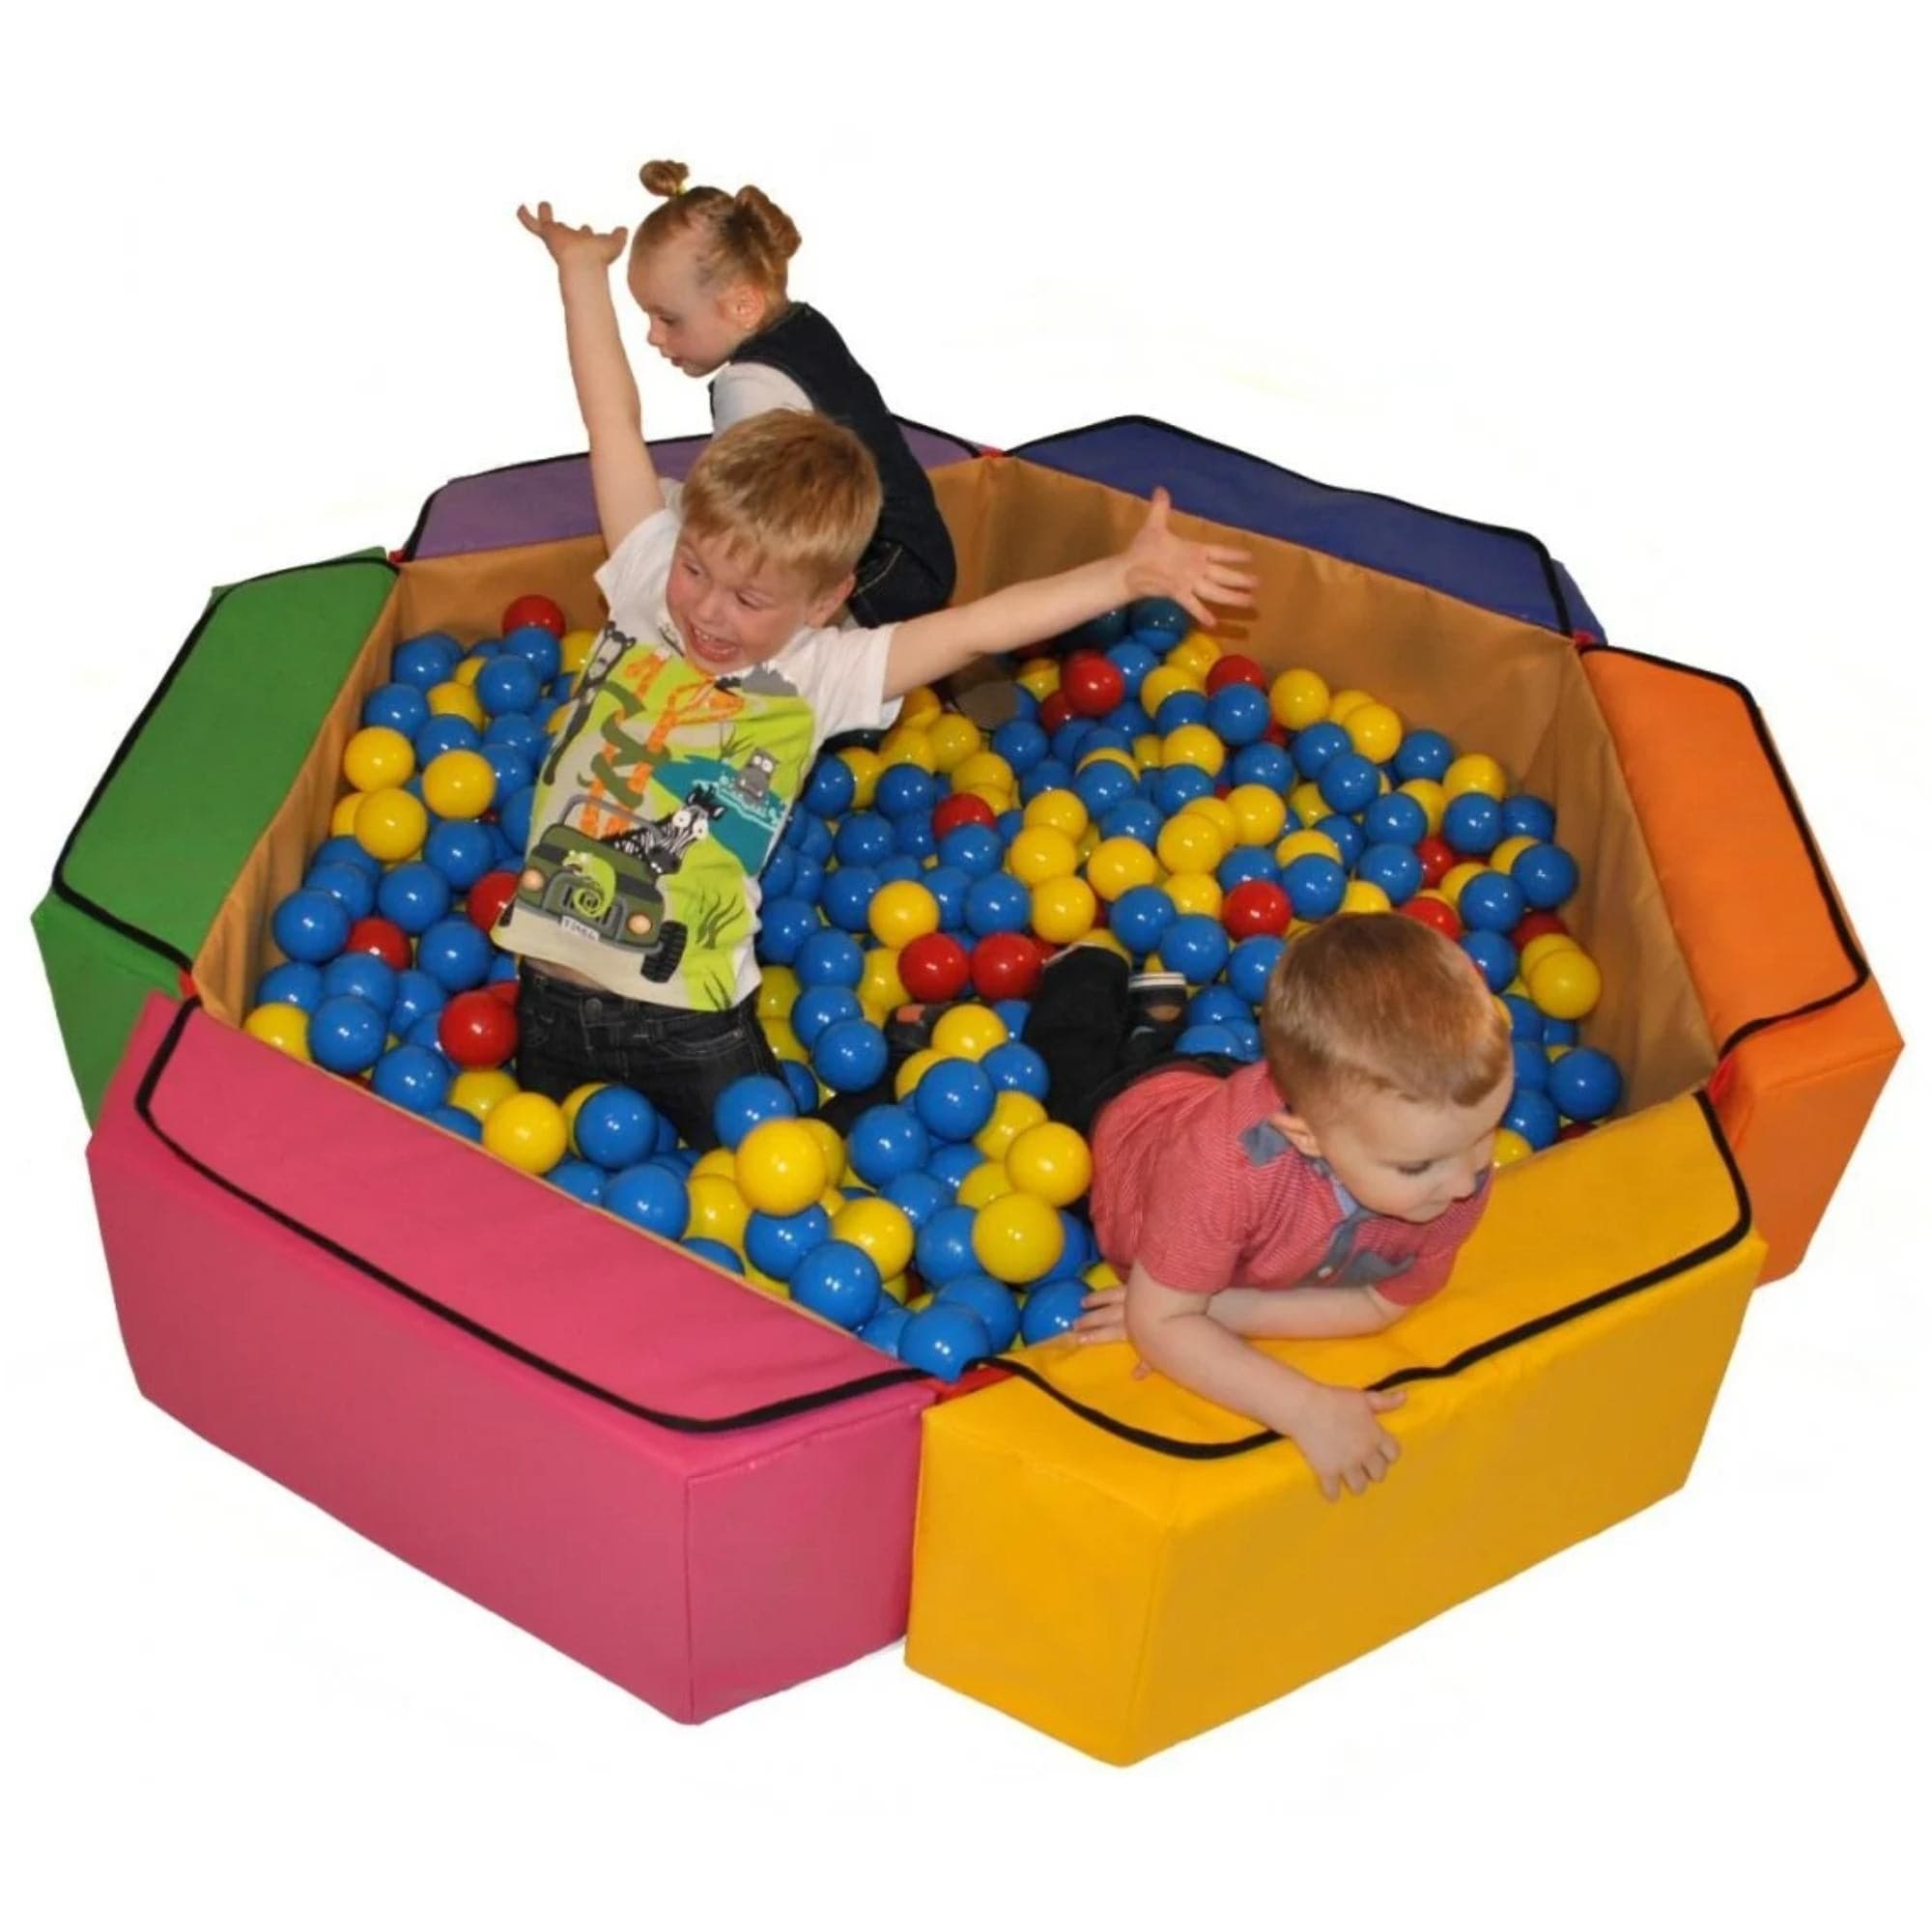 Soft Play Large Hexagonal Ball Pool with 500 Balls, The Hexagonal Ball Pool comes in two sizes and is ideal for any nursery. It can be assembled in seconds using Velcro fixings and provides hours of fun. When not being used as a ball pool, the blocks provide extra fun as a construction set or seating. The balls are contained safely within the ball pool liner for easy storage. It has 500 balls and is ideal for up to 6 children. Made using high quality foam with wipe clean PVC covers, for practicality and a l